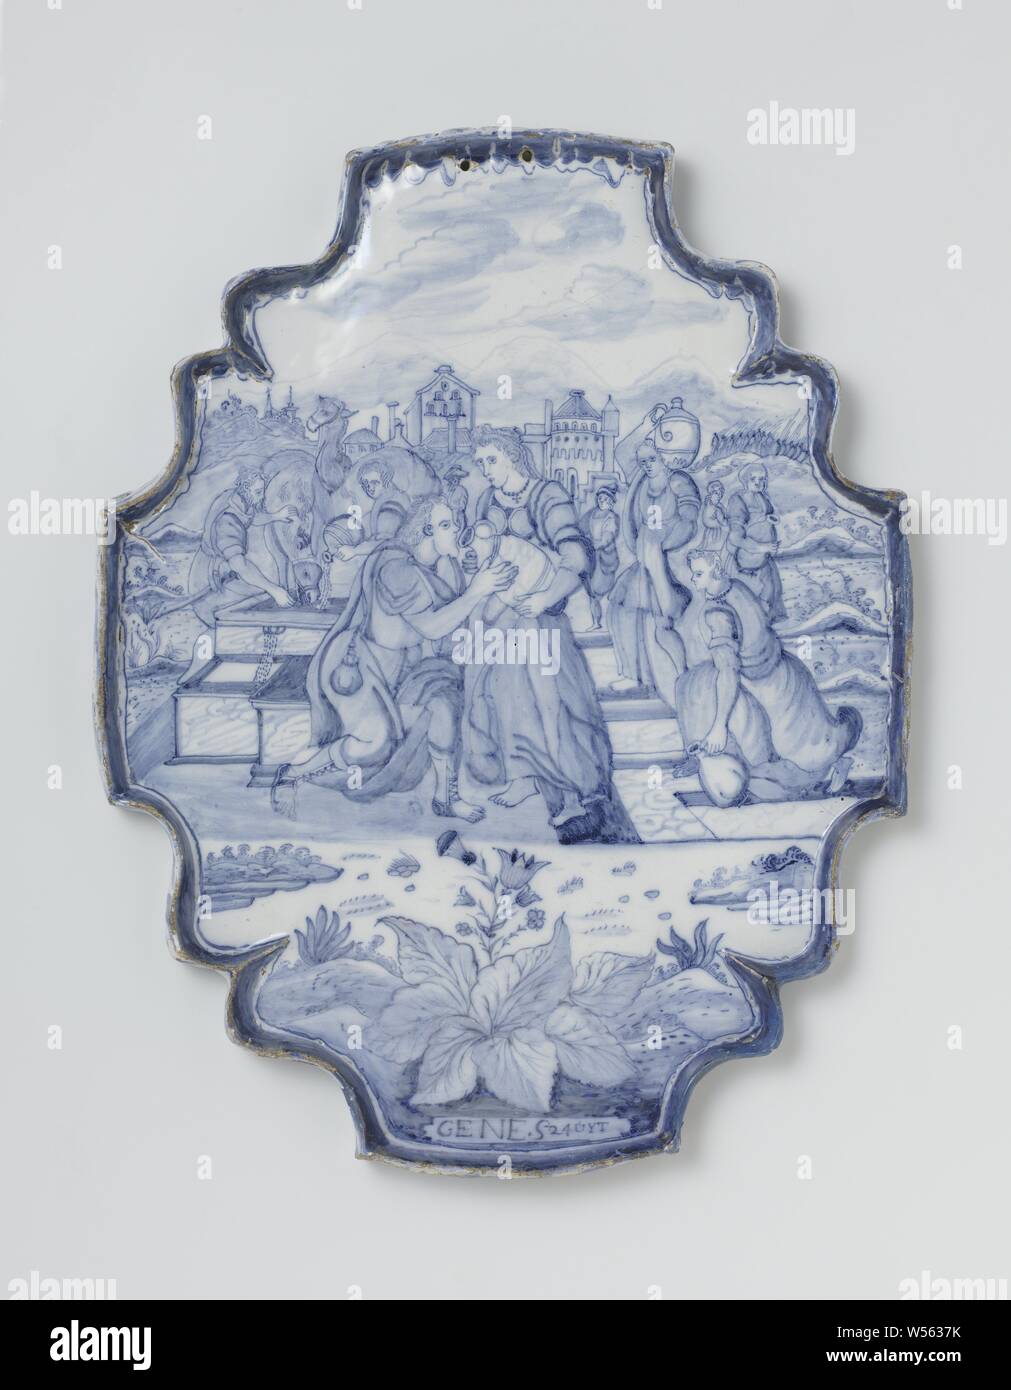 Plate with representation of Eliezer and Rebecca, Genesis 24, Plate of faience. With the presentation of Eliezer and Rebecca, Genesis 24., anonymous, Delft (possibly), c. 1740 - c. 1780, h 45.5 cm × w 36 cm Stock Photo